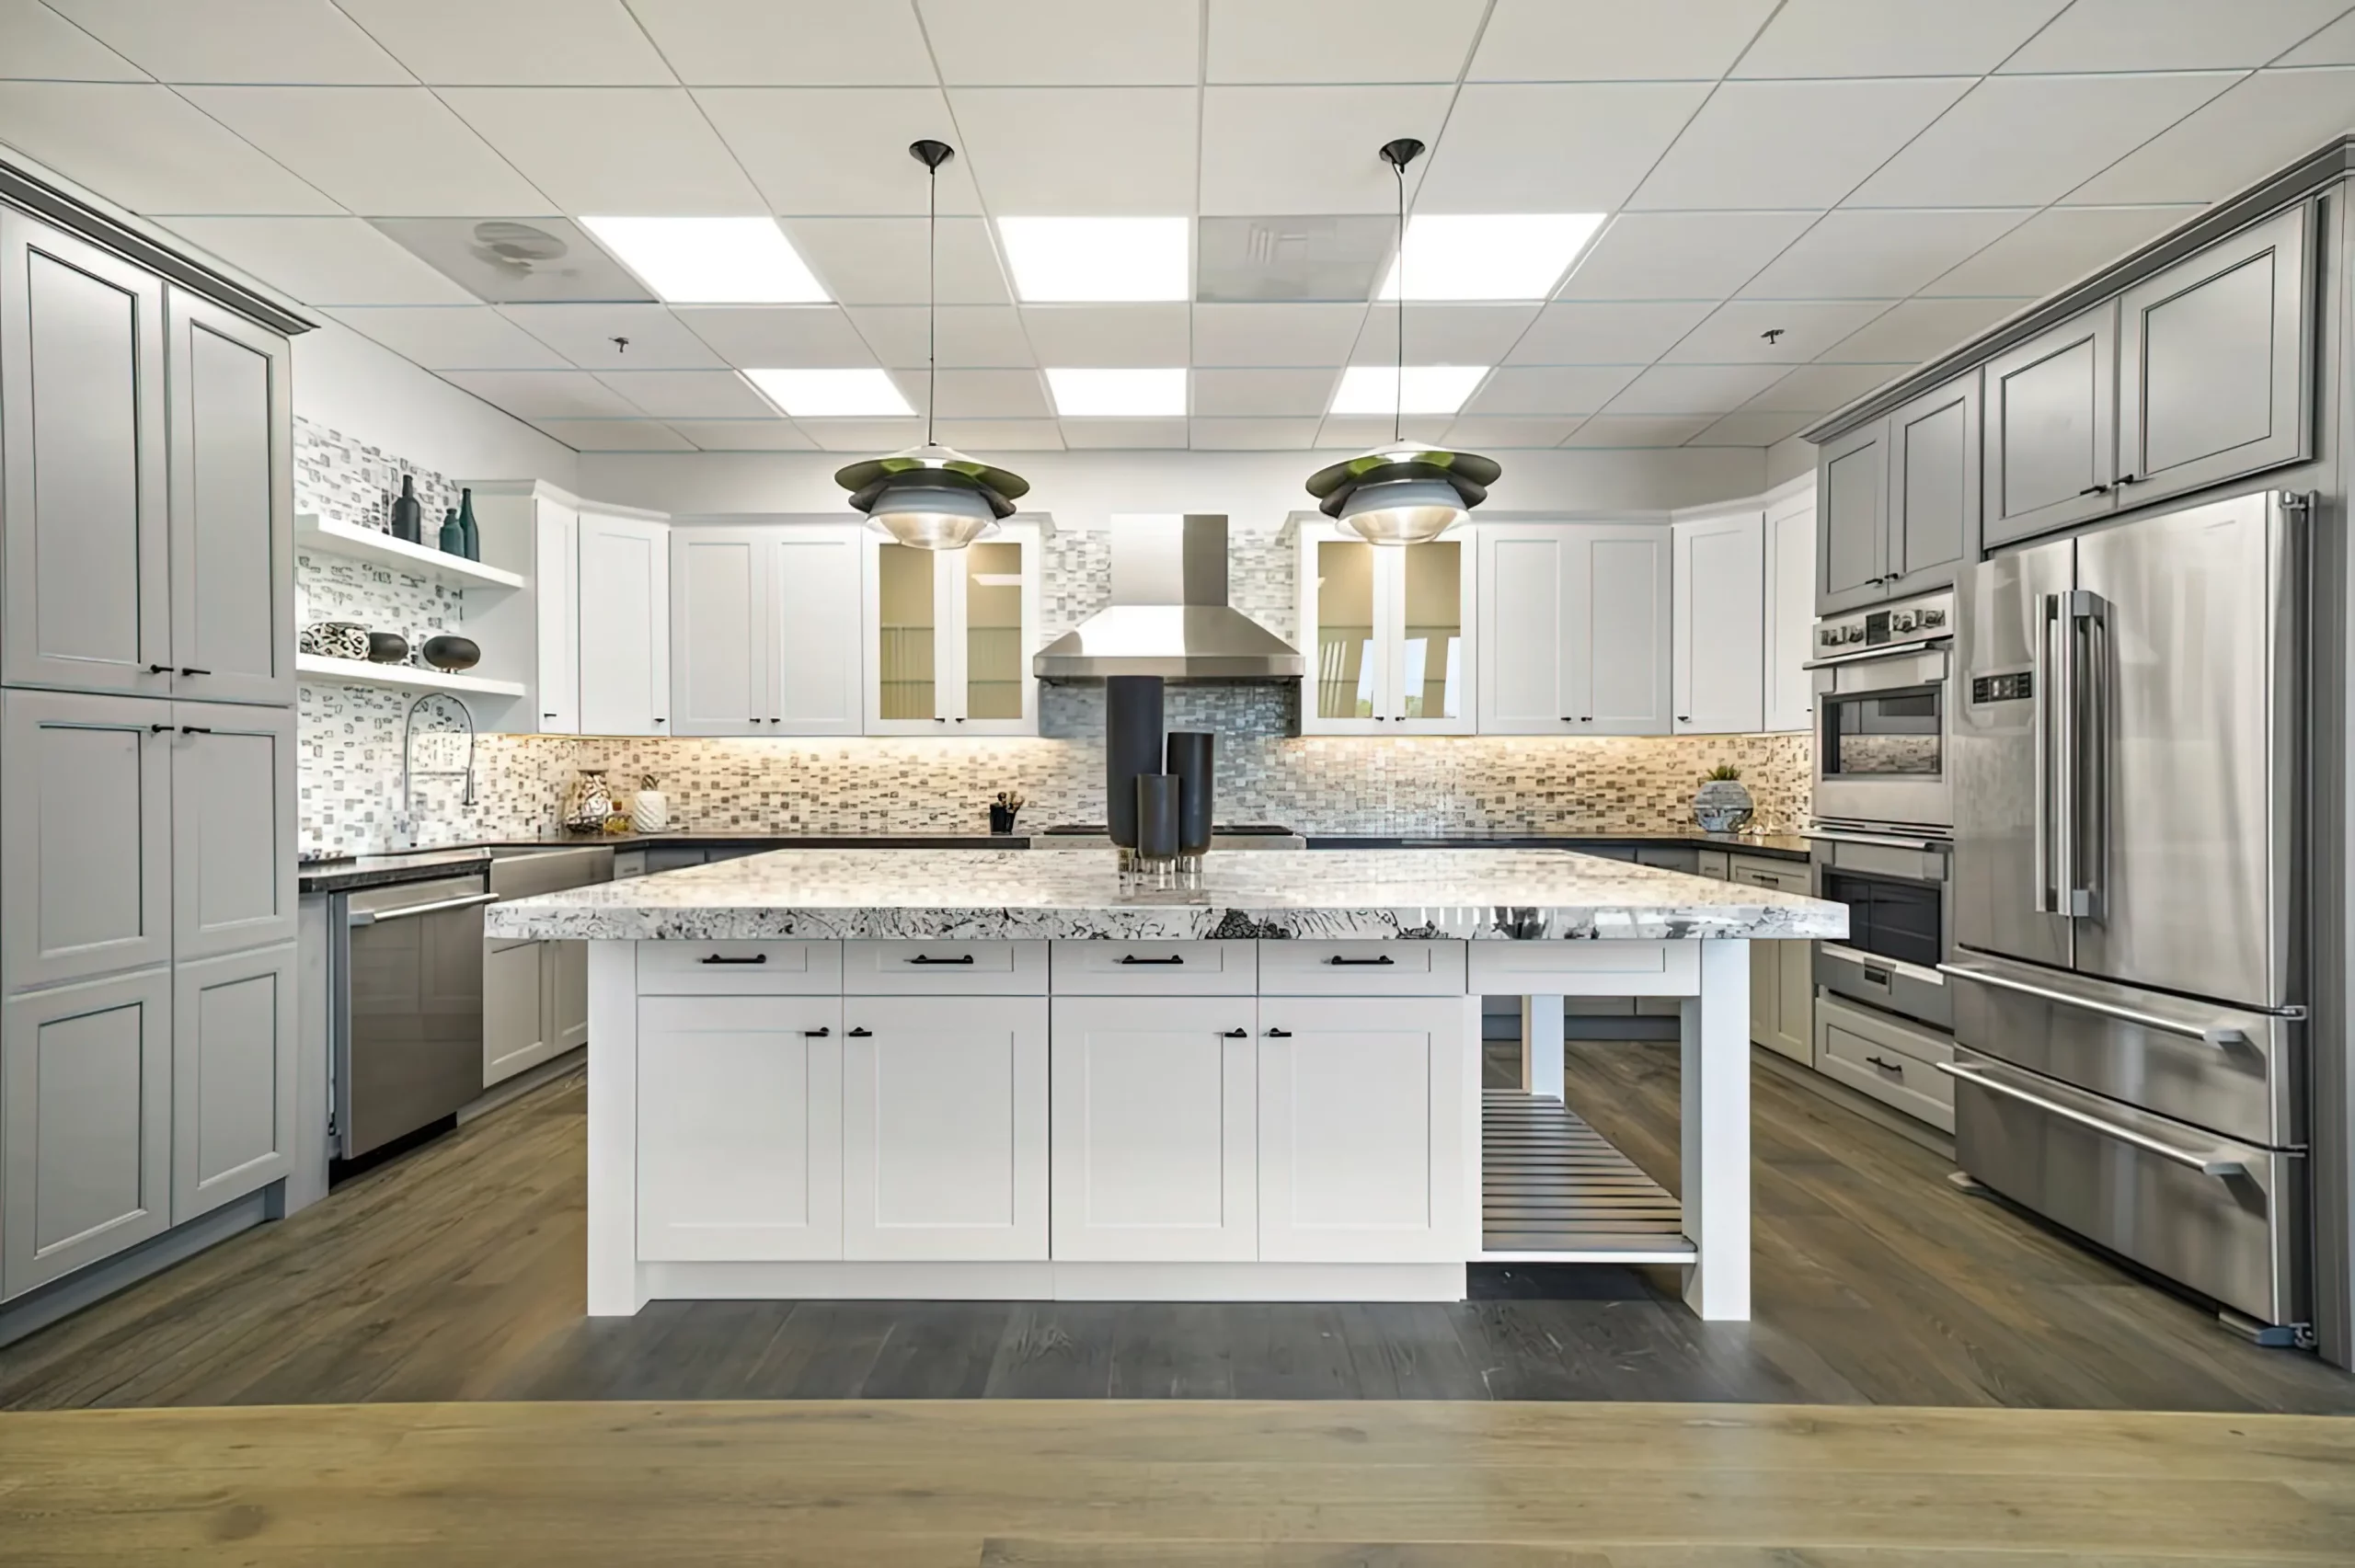 Due to its U-Shaped unique structure, this kitchen layout requires a larger space than other kitchen layouts, making it less suitable for smaller homes or apartments.